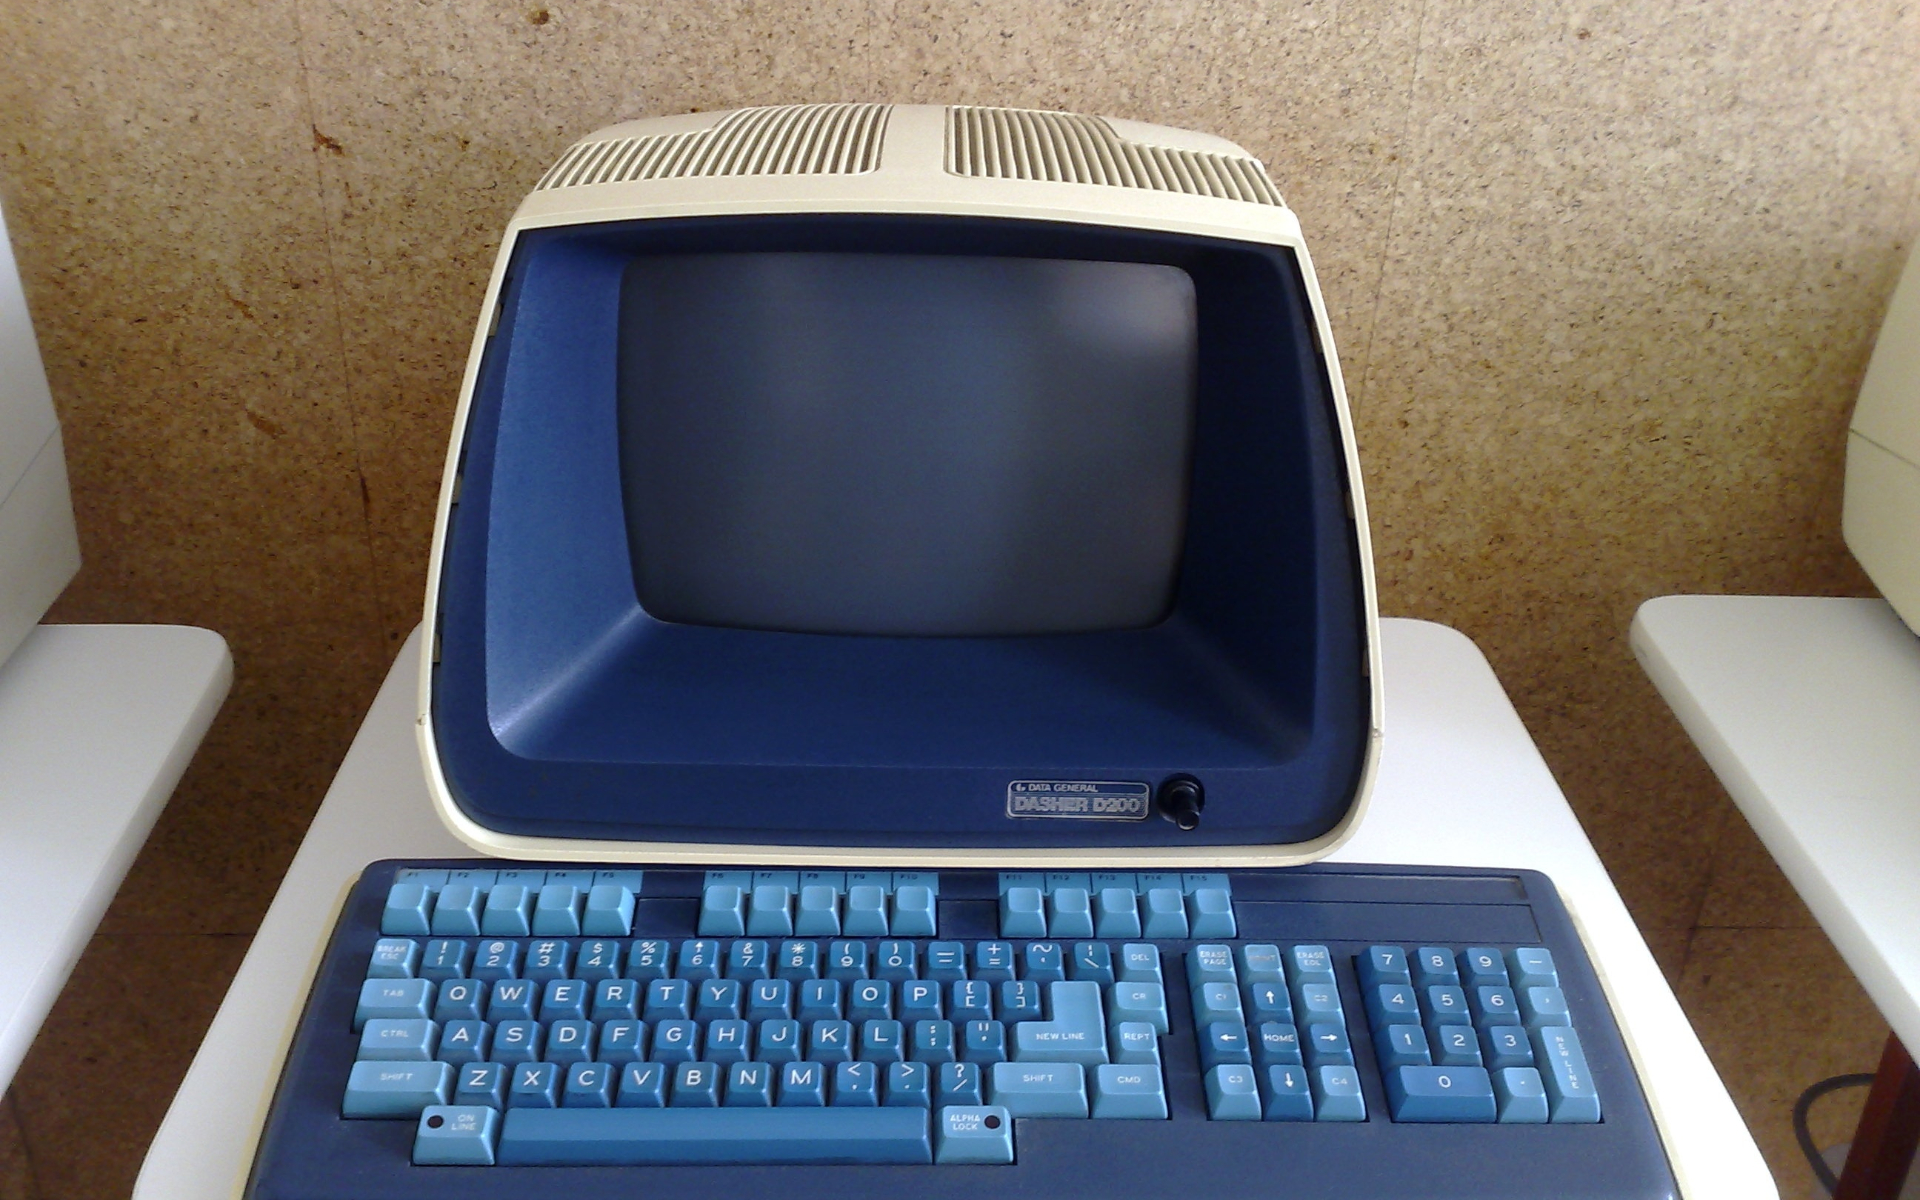 blue and white crt monitor and keyboard set